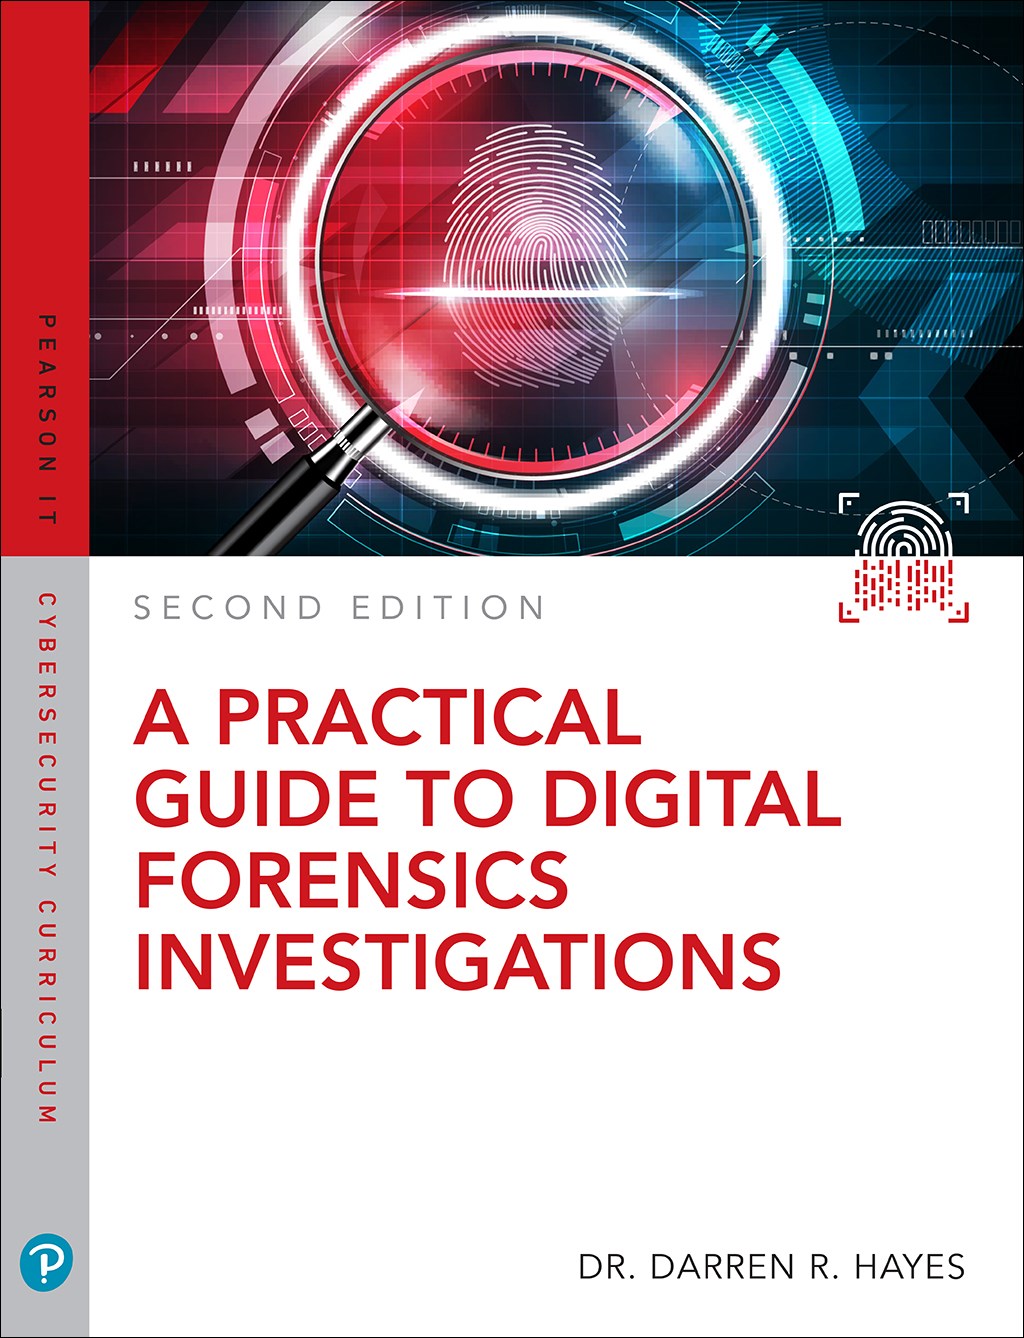 Practical Guide to Digital Forensics Investigations, 2nd Edition